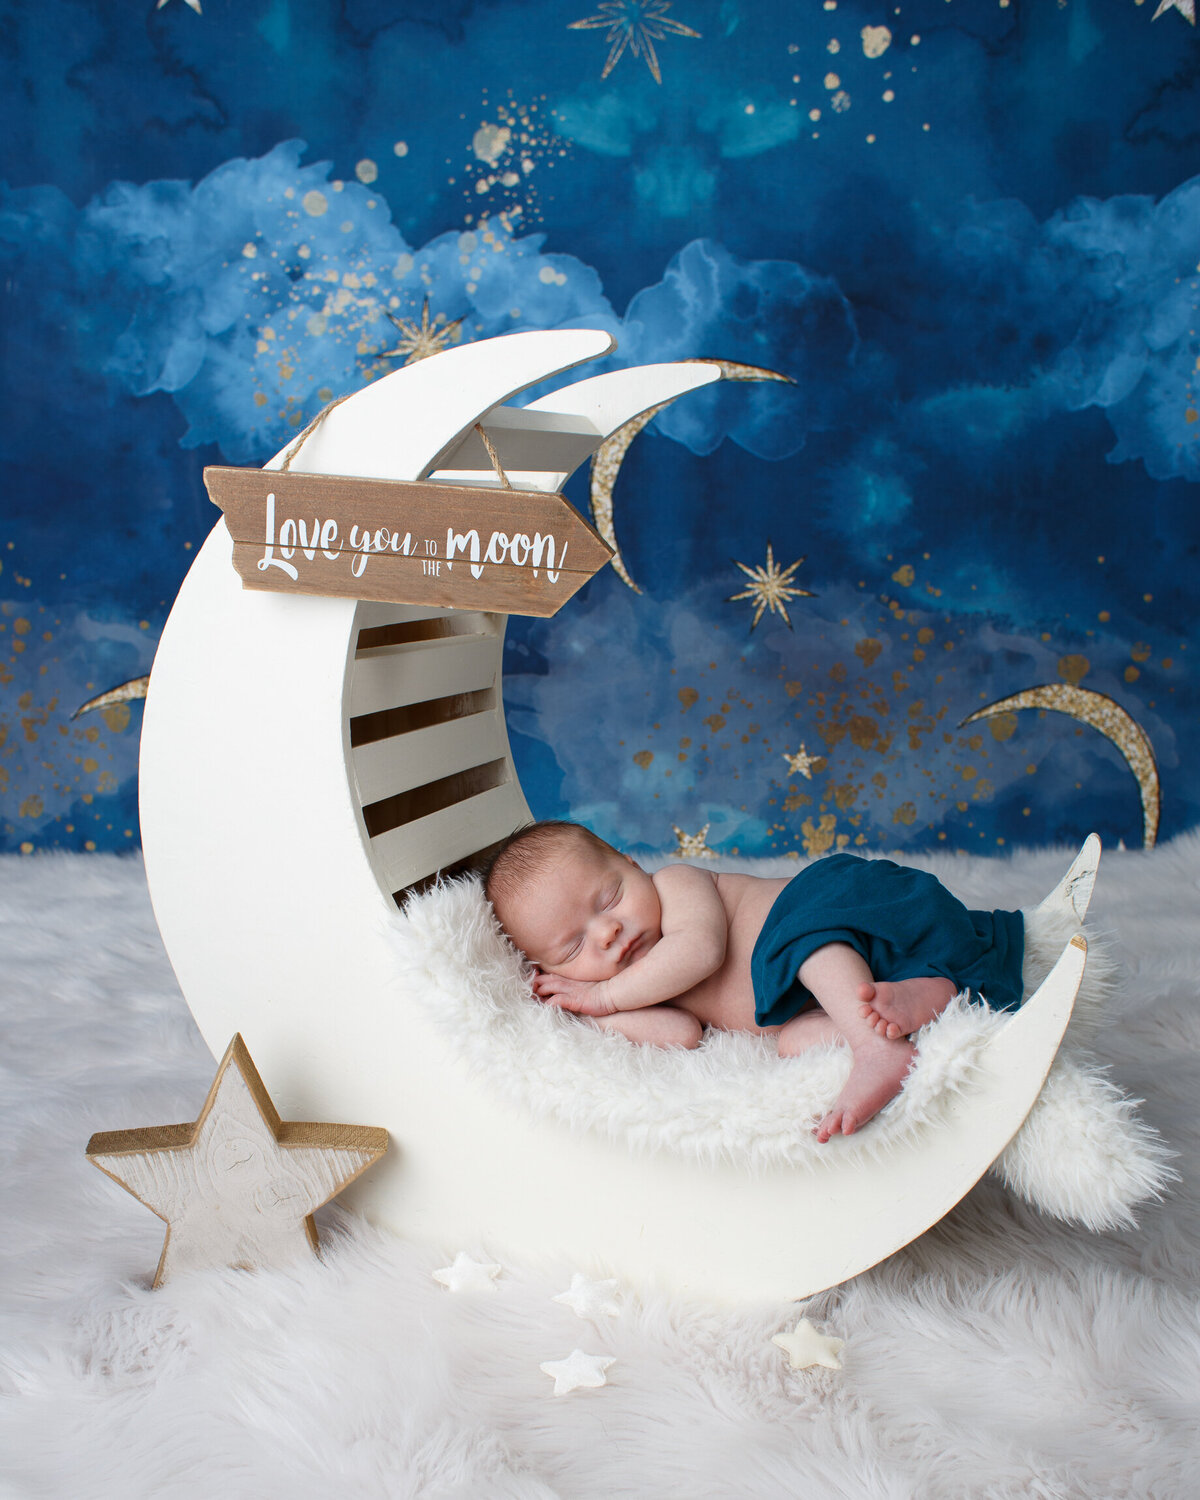 Portrait of a newborn baby sleeping on a moom photo prop against a starry night sky background